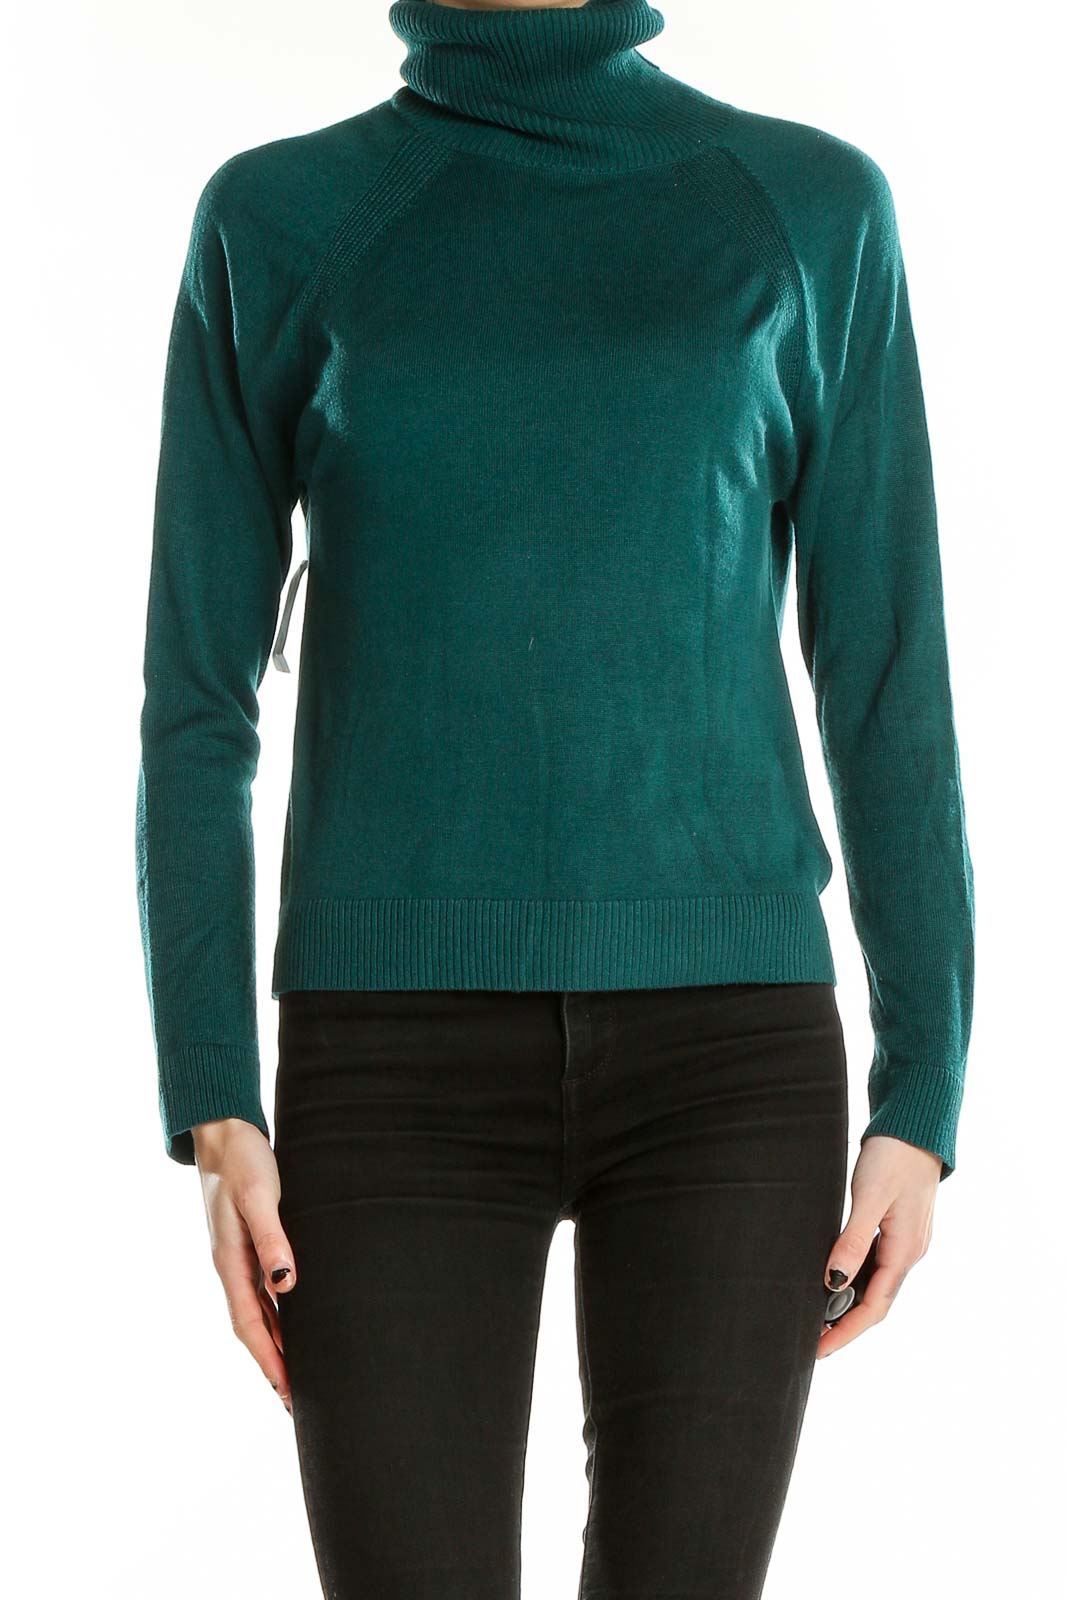 Green Turtle Neck Sweater Front